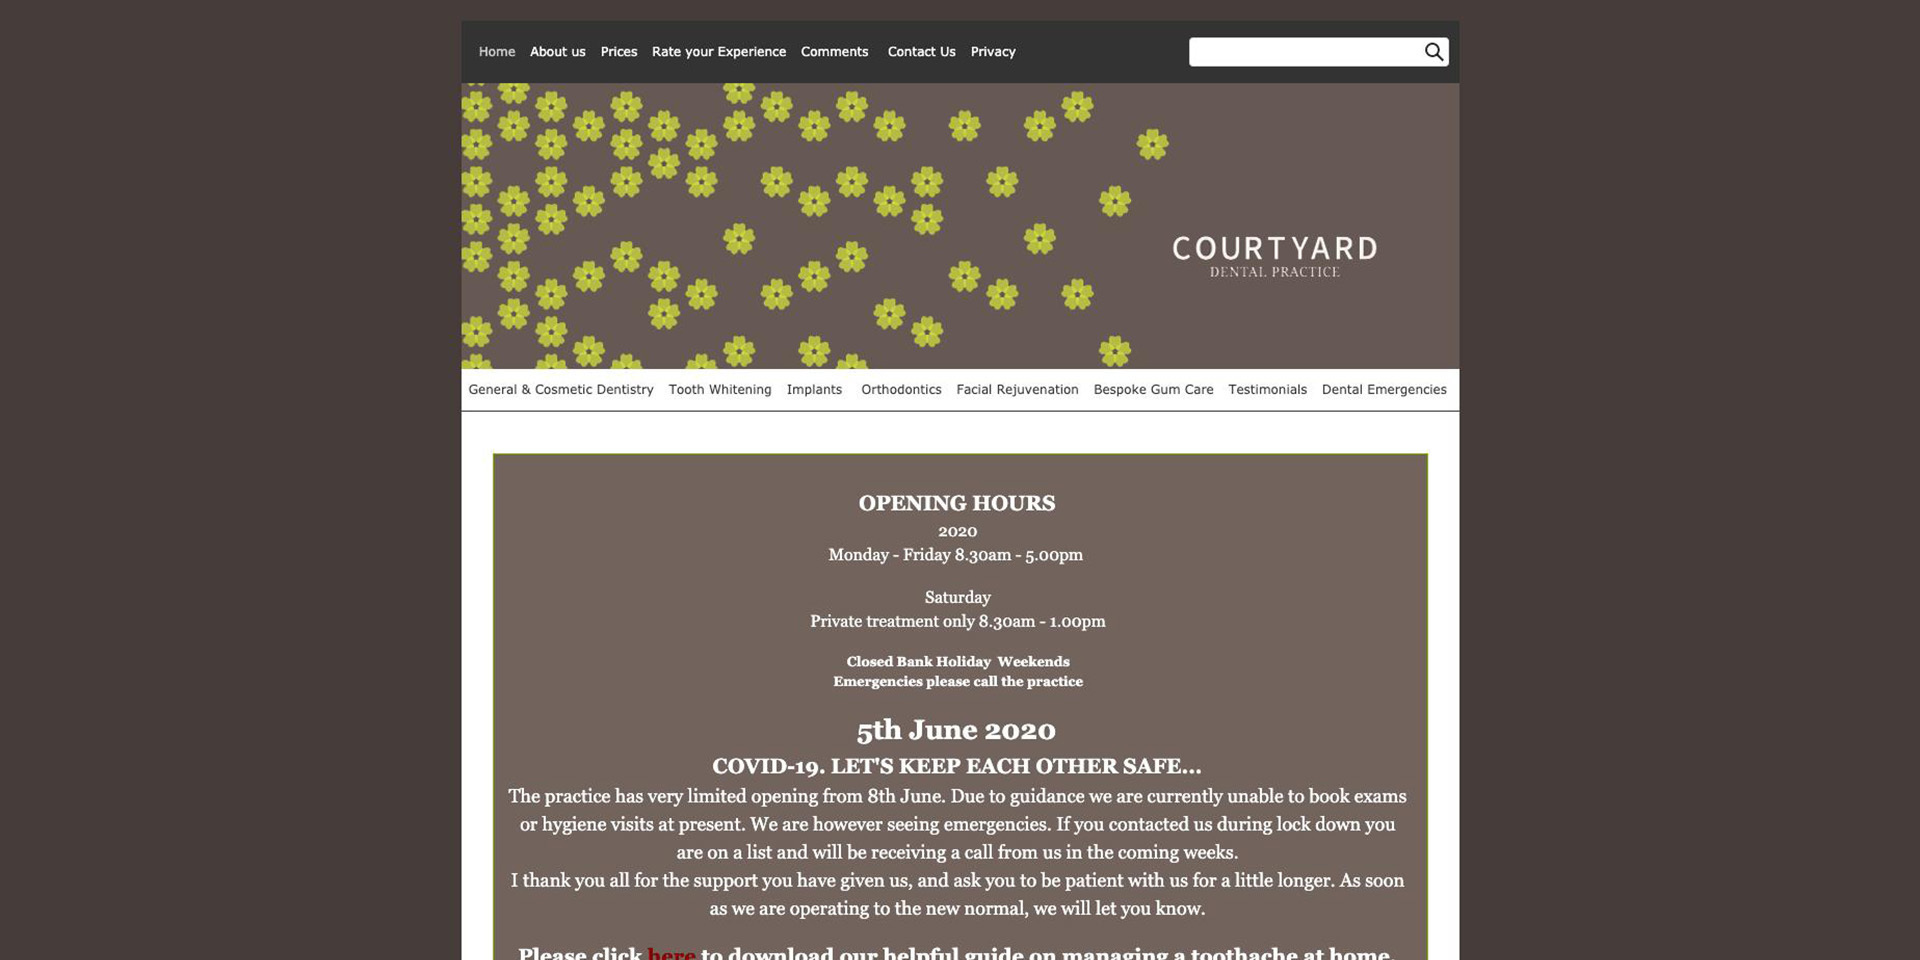 The old Courtyard website design